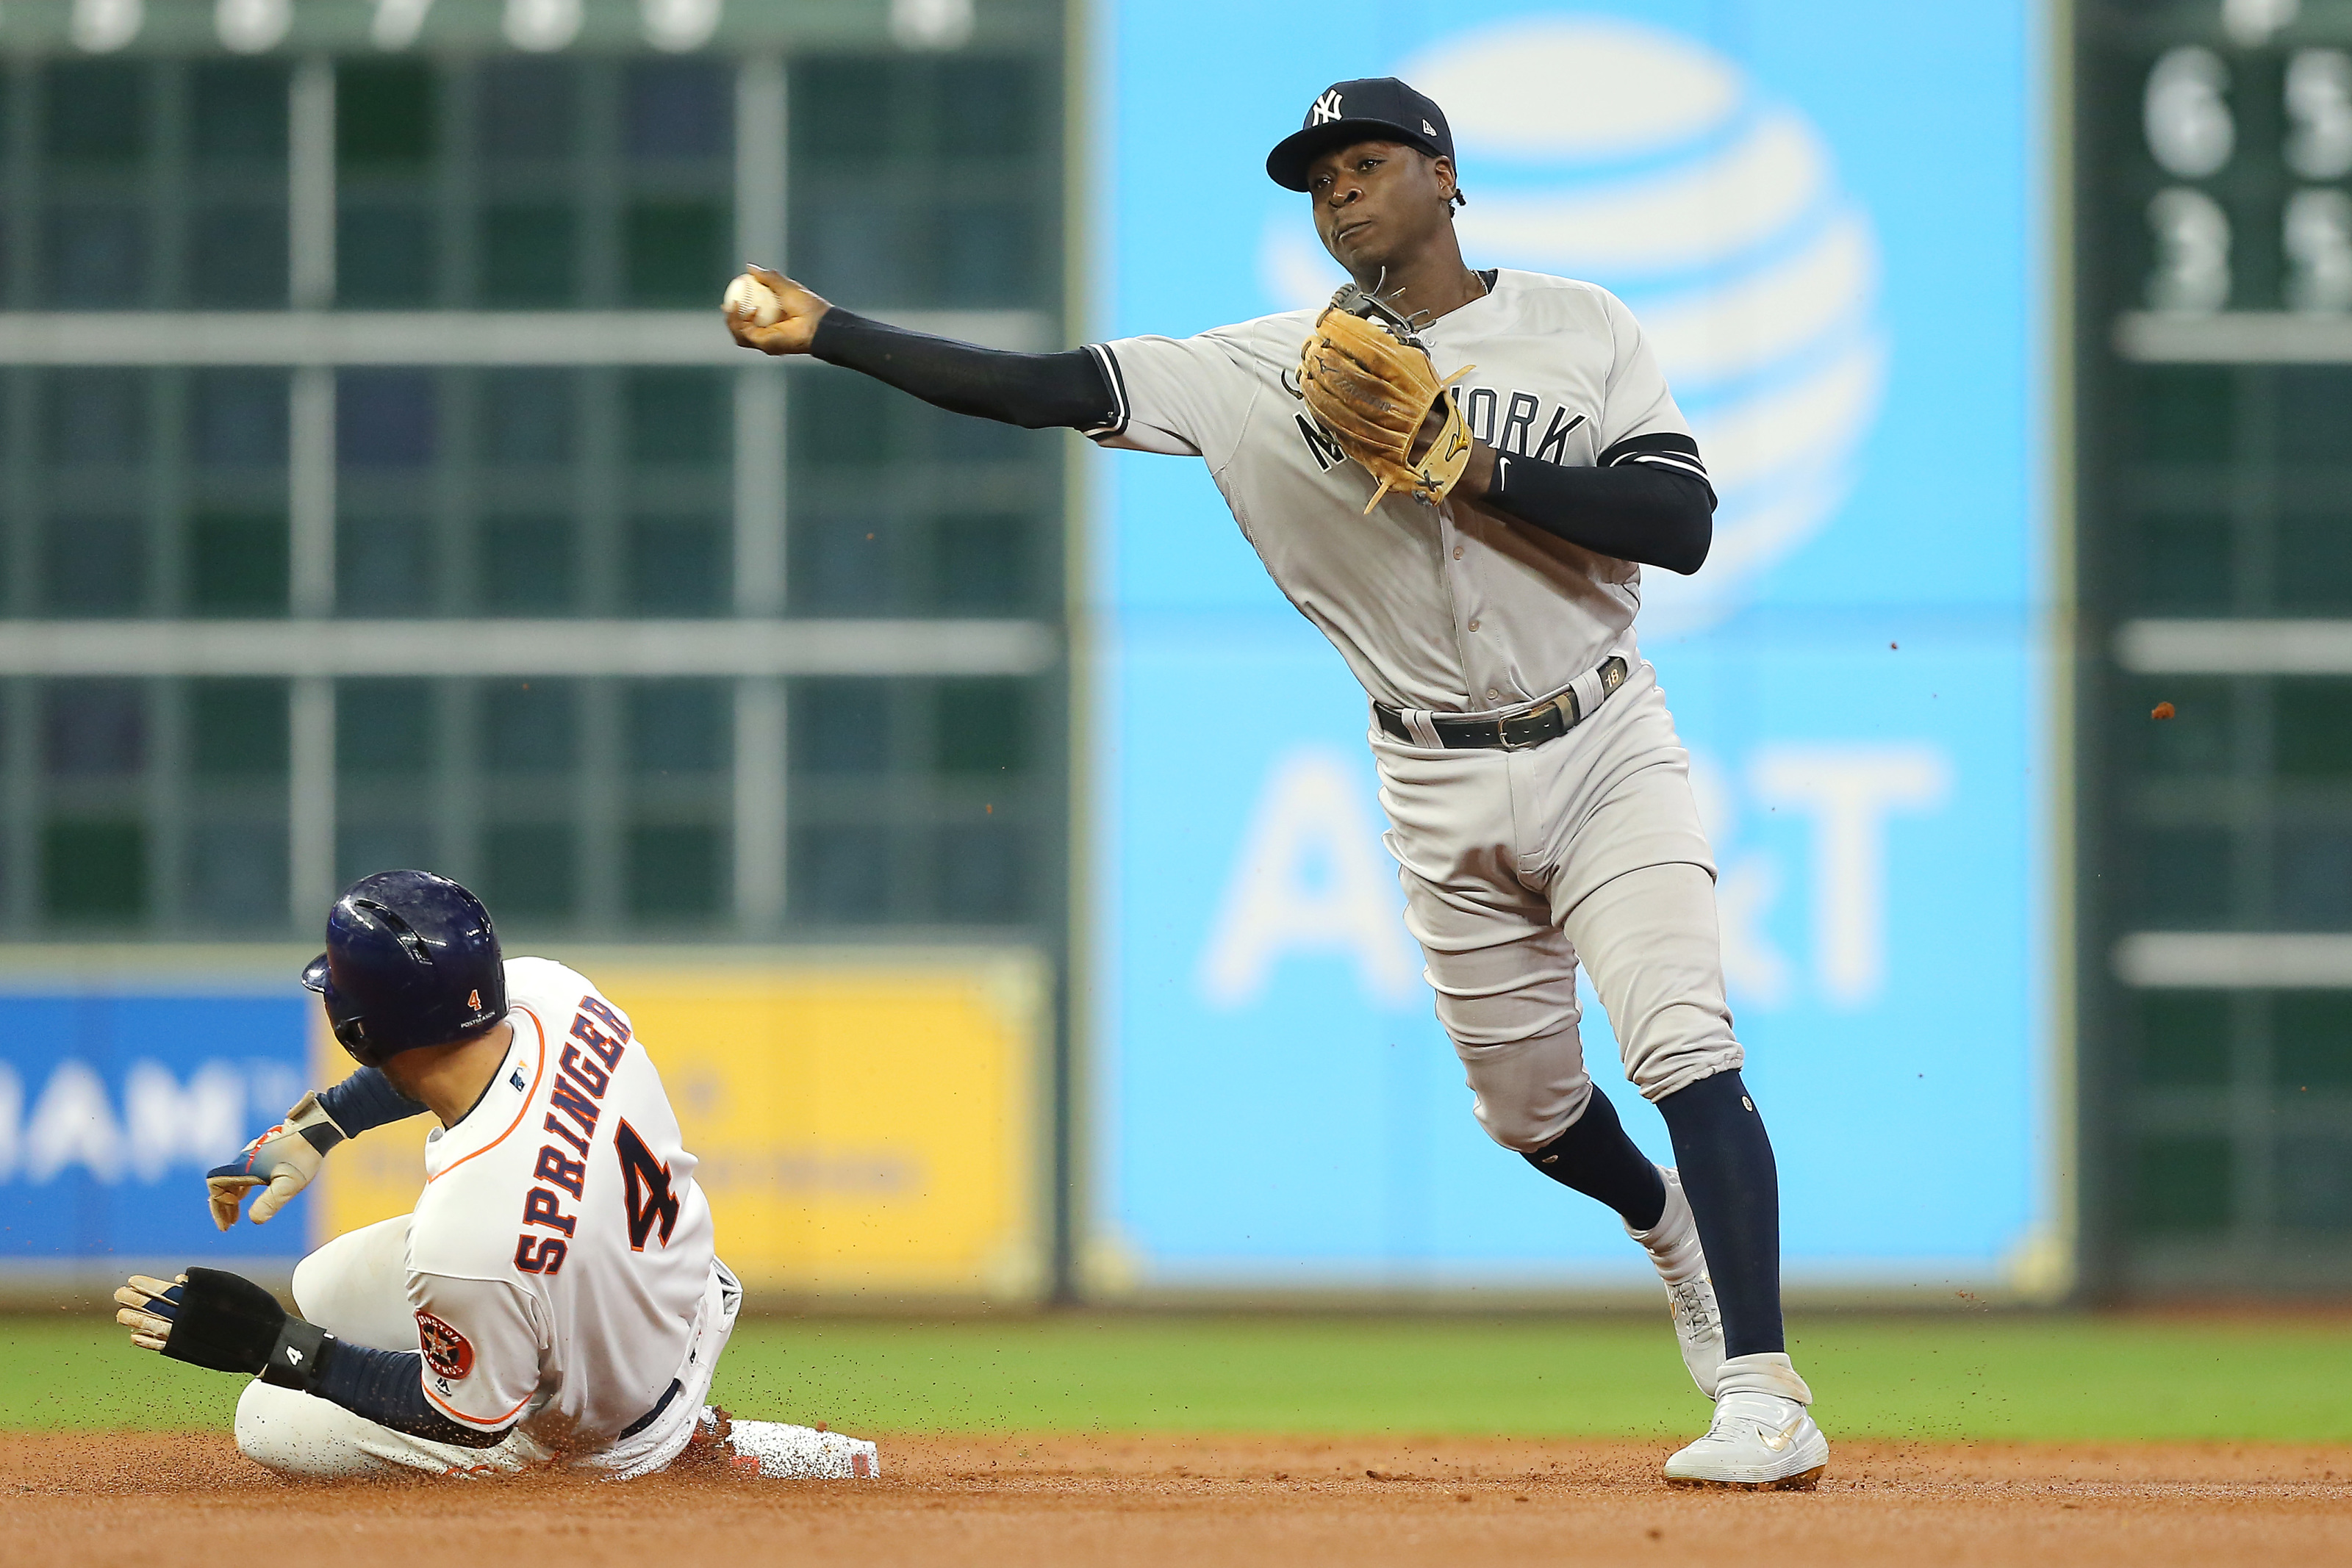 Why the Yankees should steer clear of Didi Gregorius - Pinstripe Alley